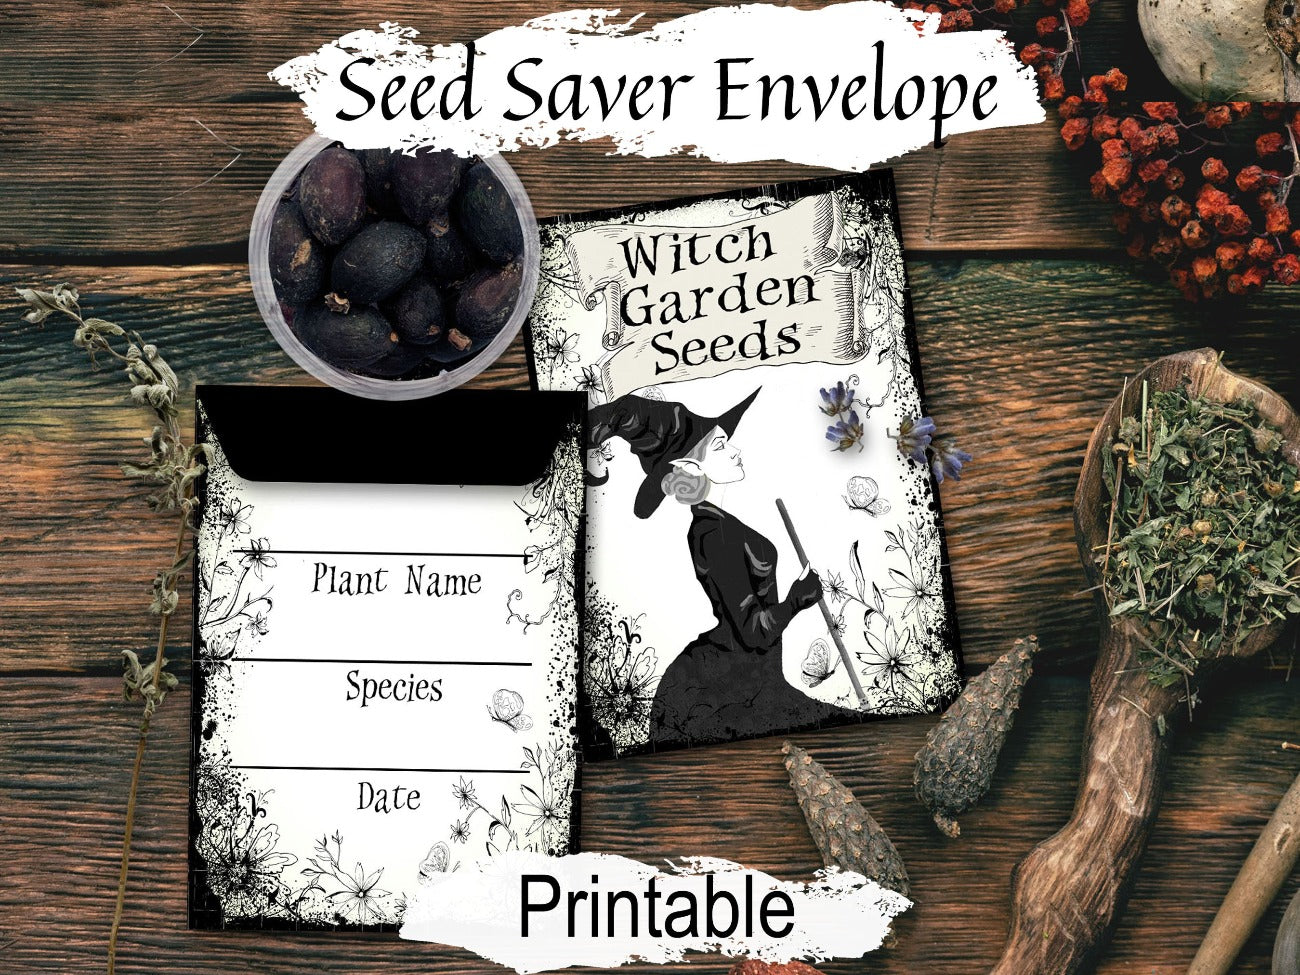 SEED SAVER ENVELOPES, Witchs Garden Envelopes, Wicca Witchcraft Seed Saving Printable Packets, Seed Envelopes, Pagan Garden Seed Saving - Morgana Magick Spell